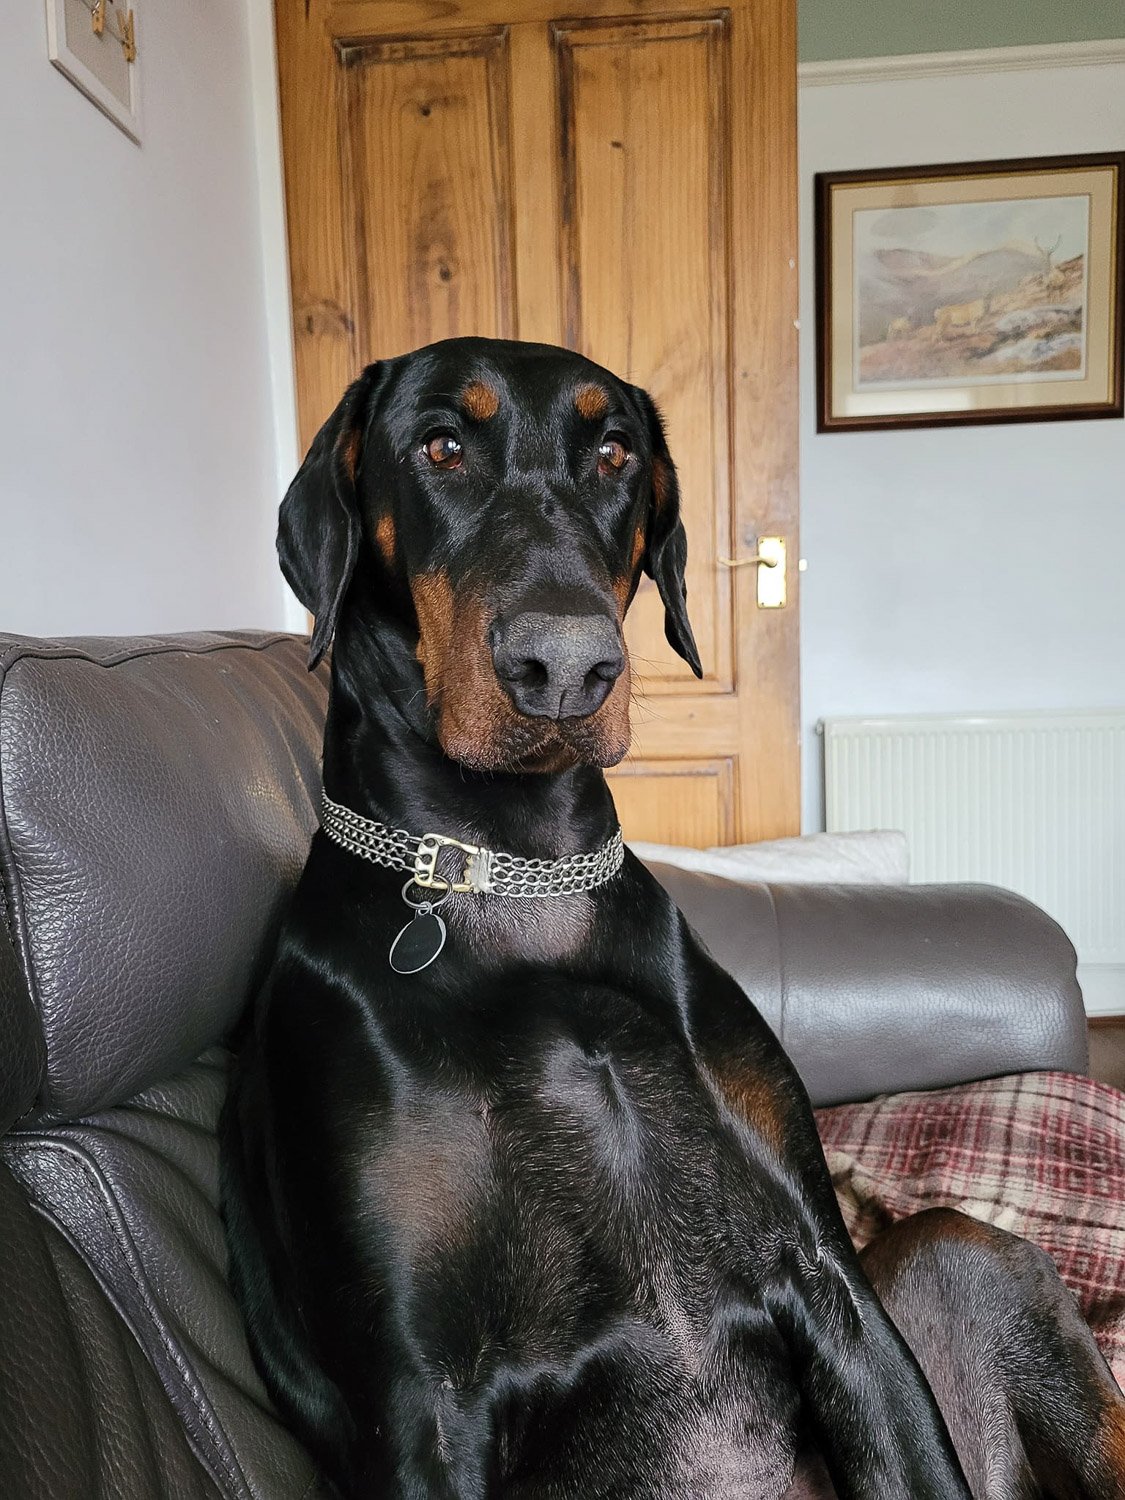 a Dobermann dog sitting upright on a leather couch